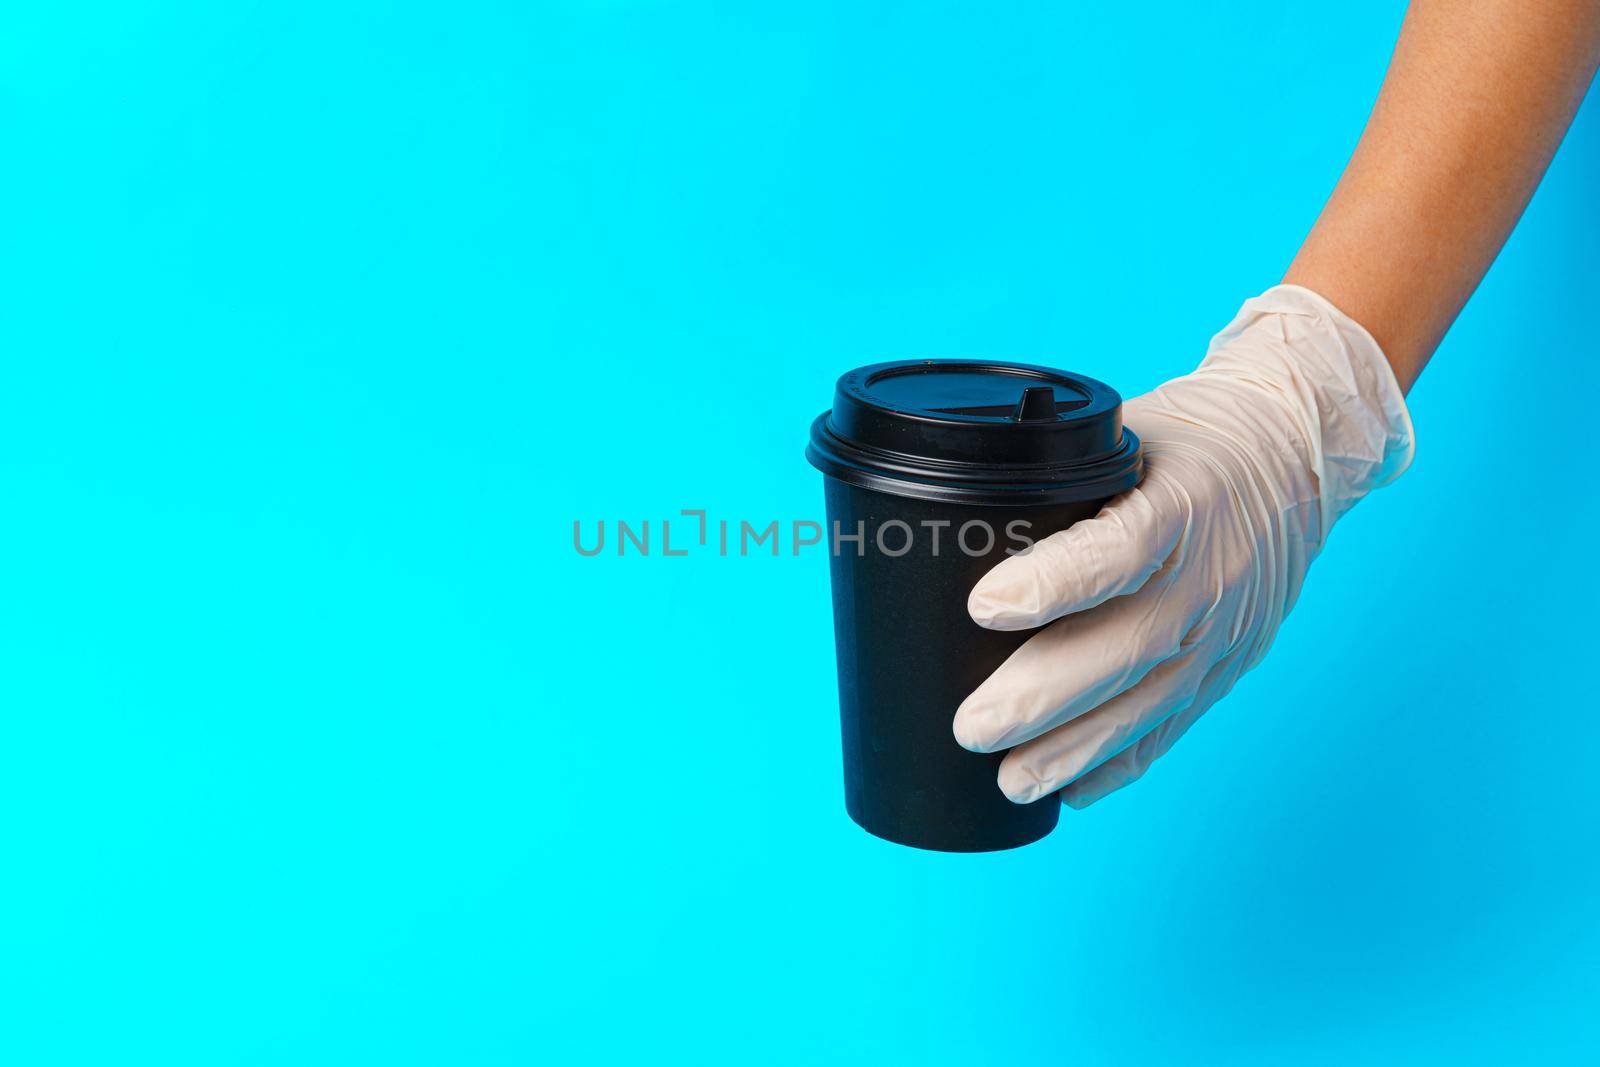 Coffee delivery. Human hand holding takeaway coffee cup by Fabrikasimf